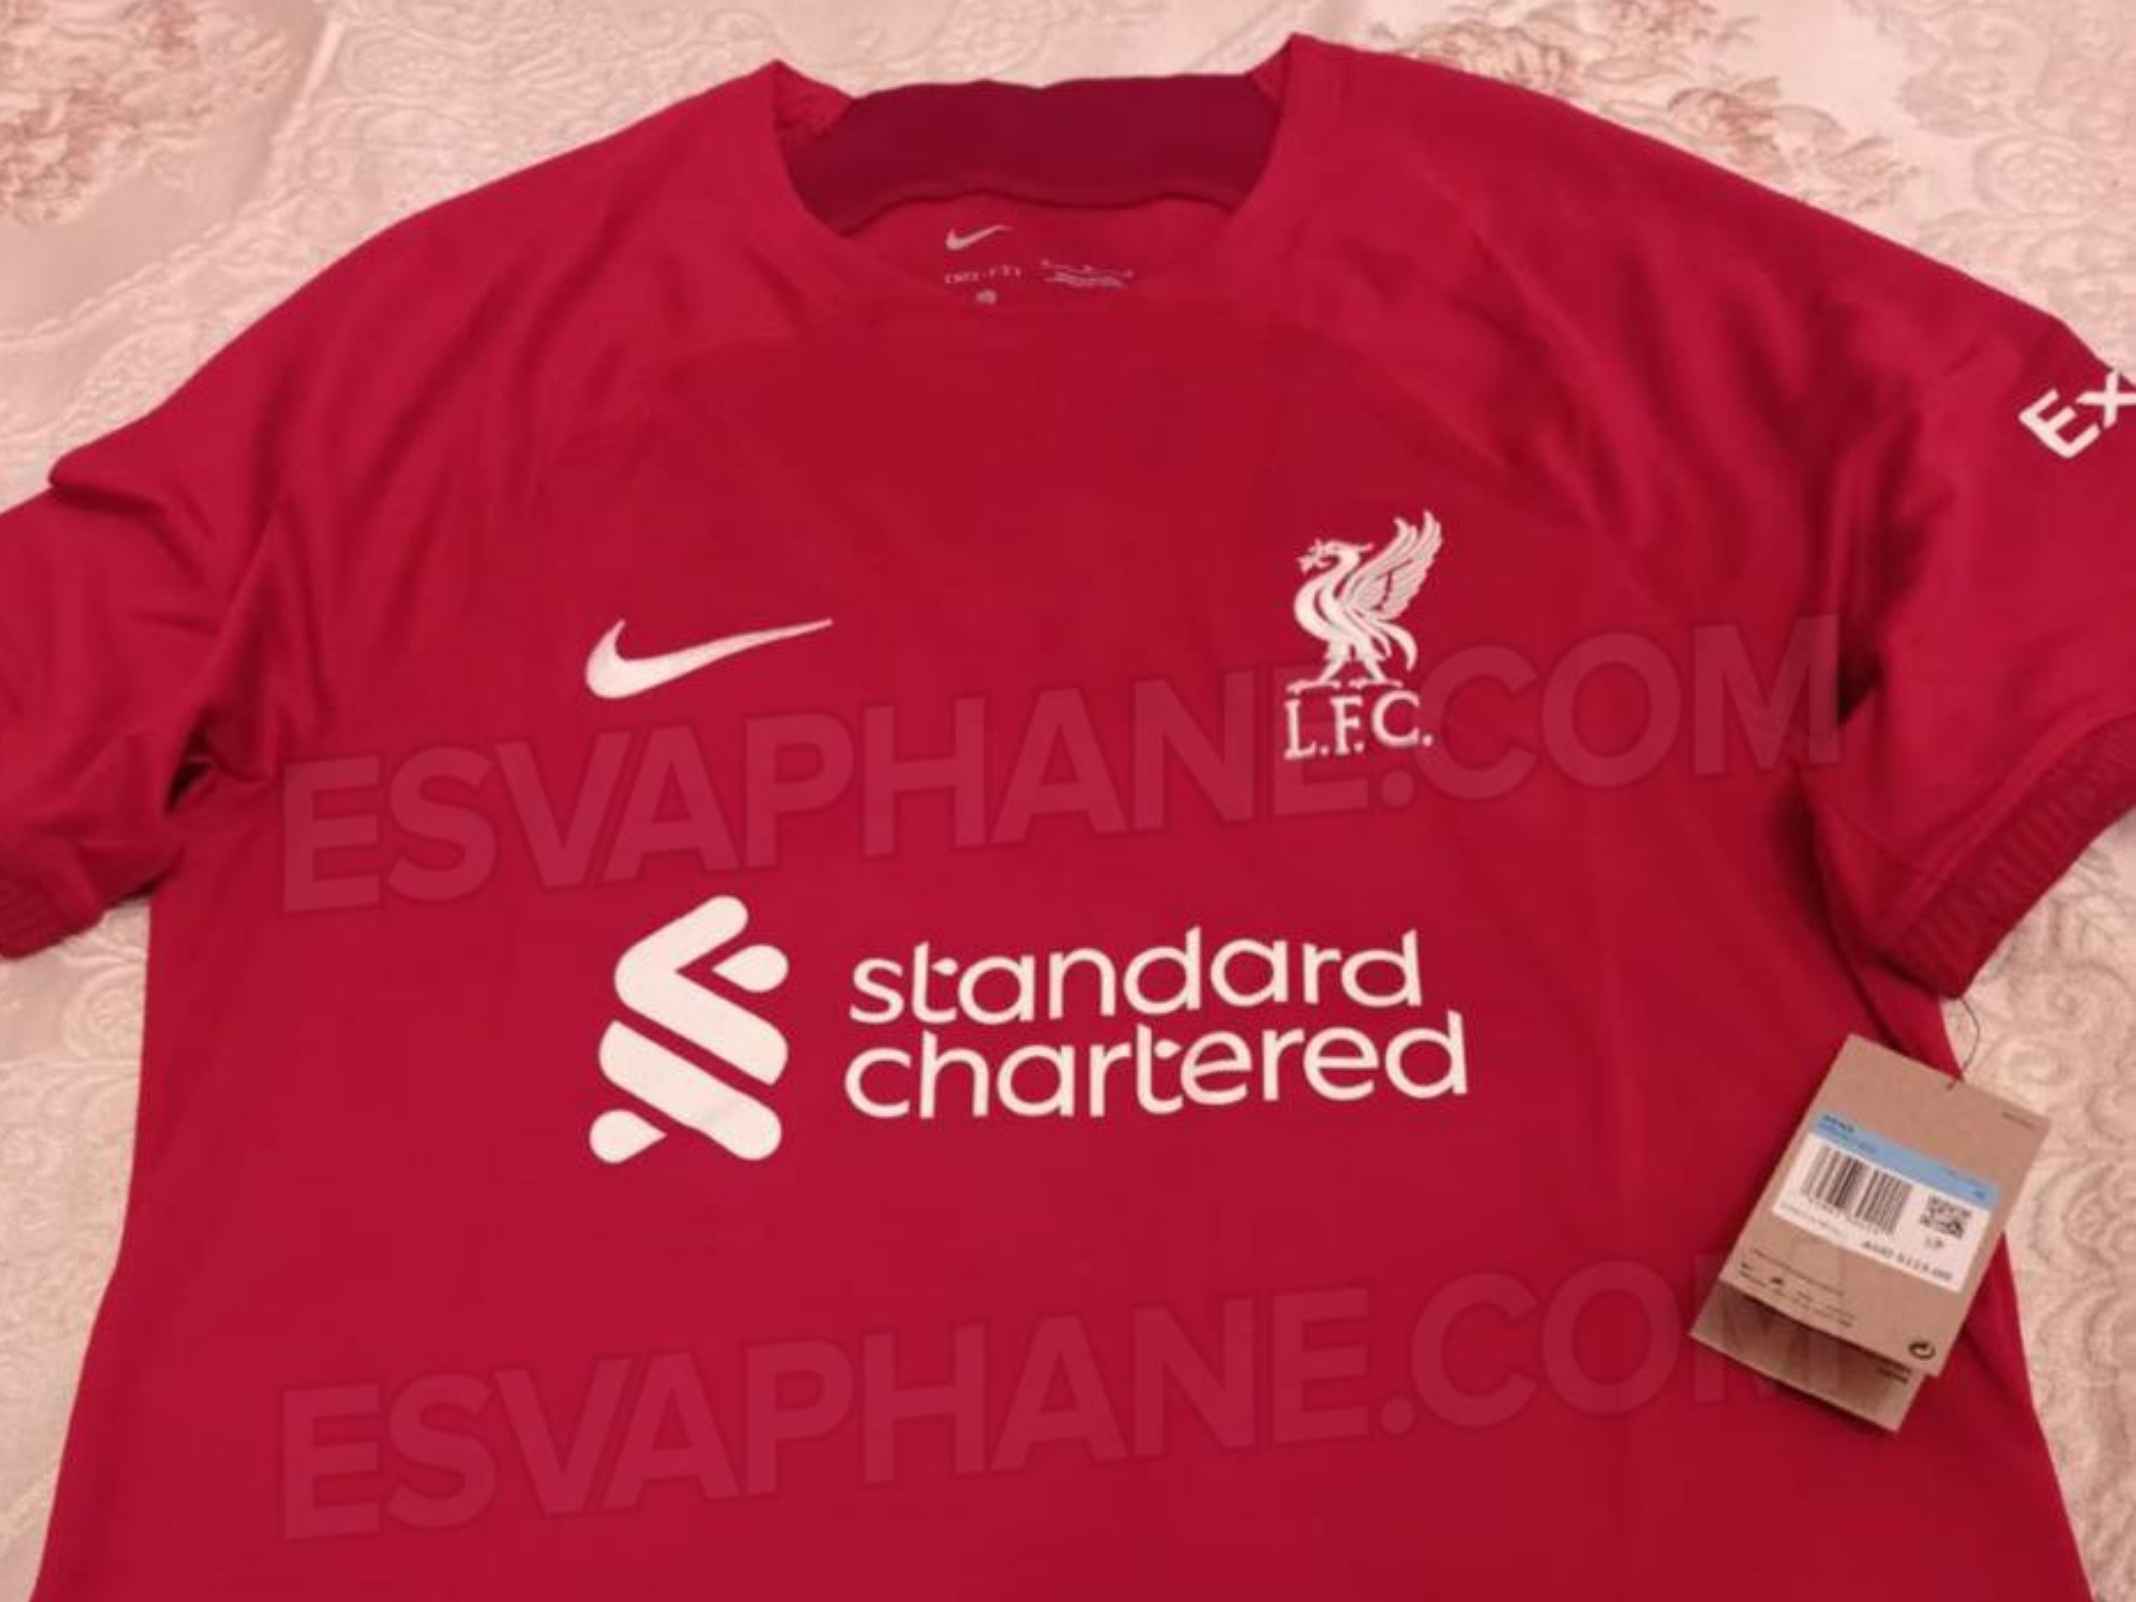 Bring Back New Balance – Liverpool fans not impressed with leaked home kit for 22/23 season